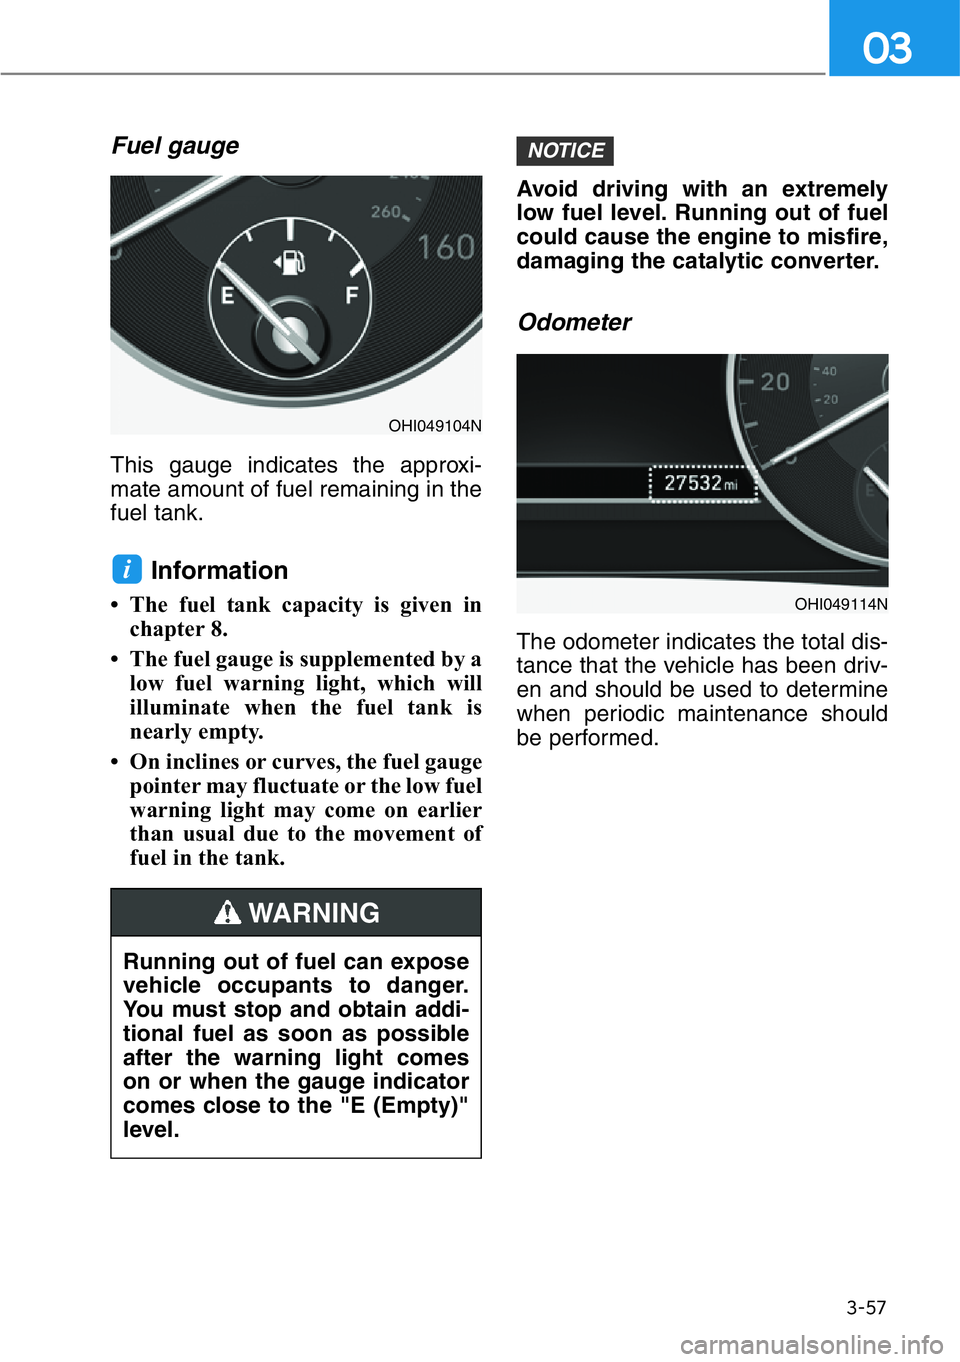 HYUNDAI GENESIS G90 2021  Owners Manual 3-57
03
Fuel gauge
This gauge indicates the approxi-
mate amount of fuel remaining in the
fuel tank.
Information
• The fuel tank capacity is given in
chapter 8.
• The fuel gauge is supplemented by